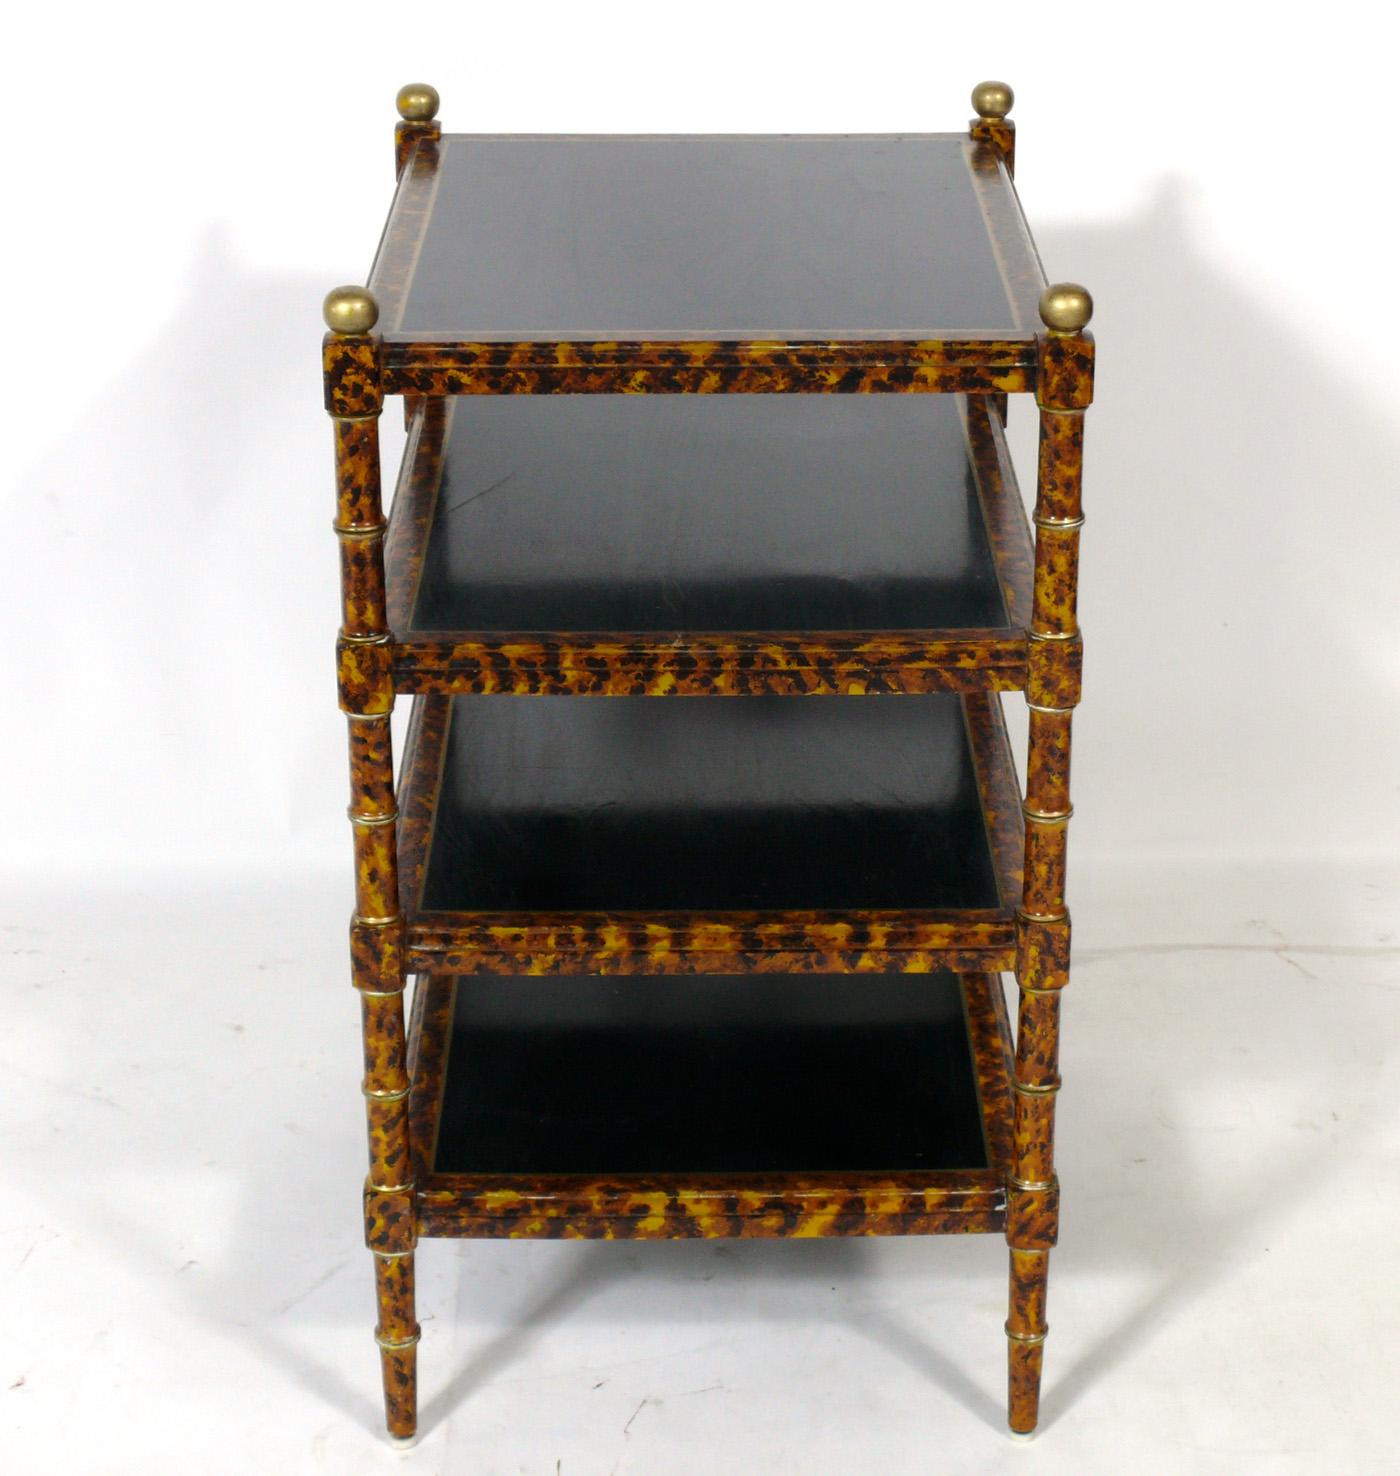 American Faux Tortoise Painted Shelf or Table Attributed to Maitland Smith